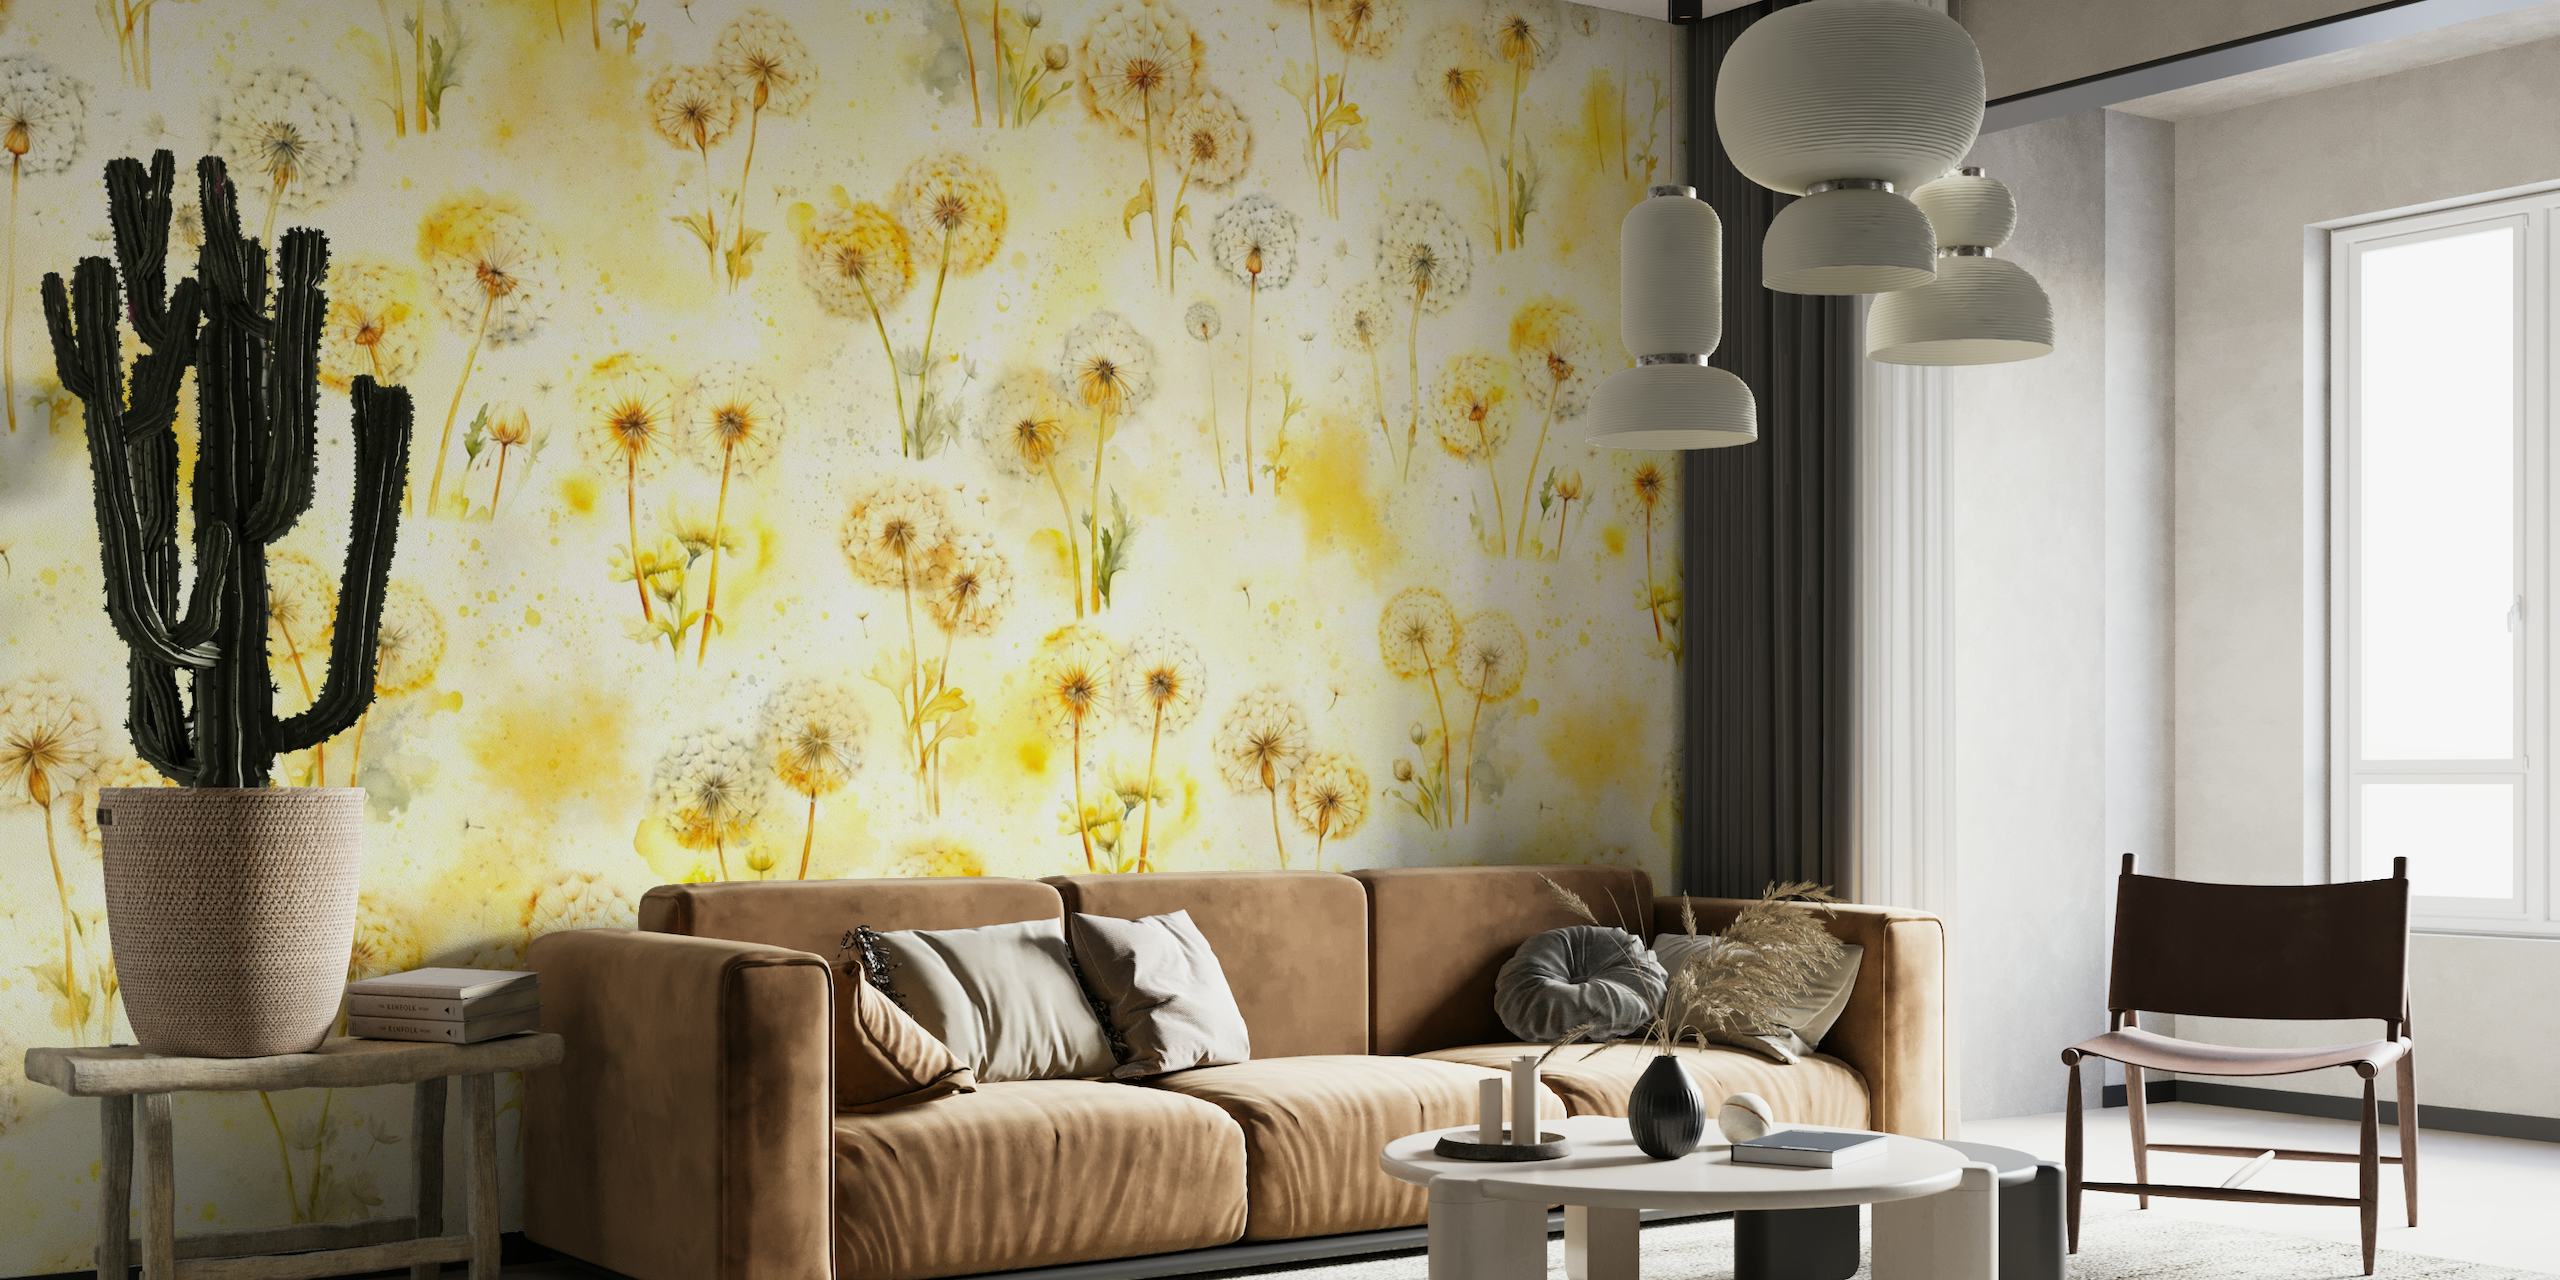 Dandelion wall mural with yellow and beige tones on happywall.com